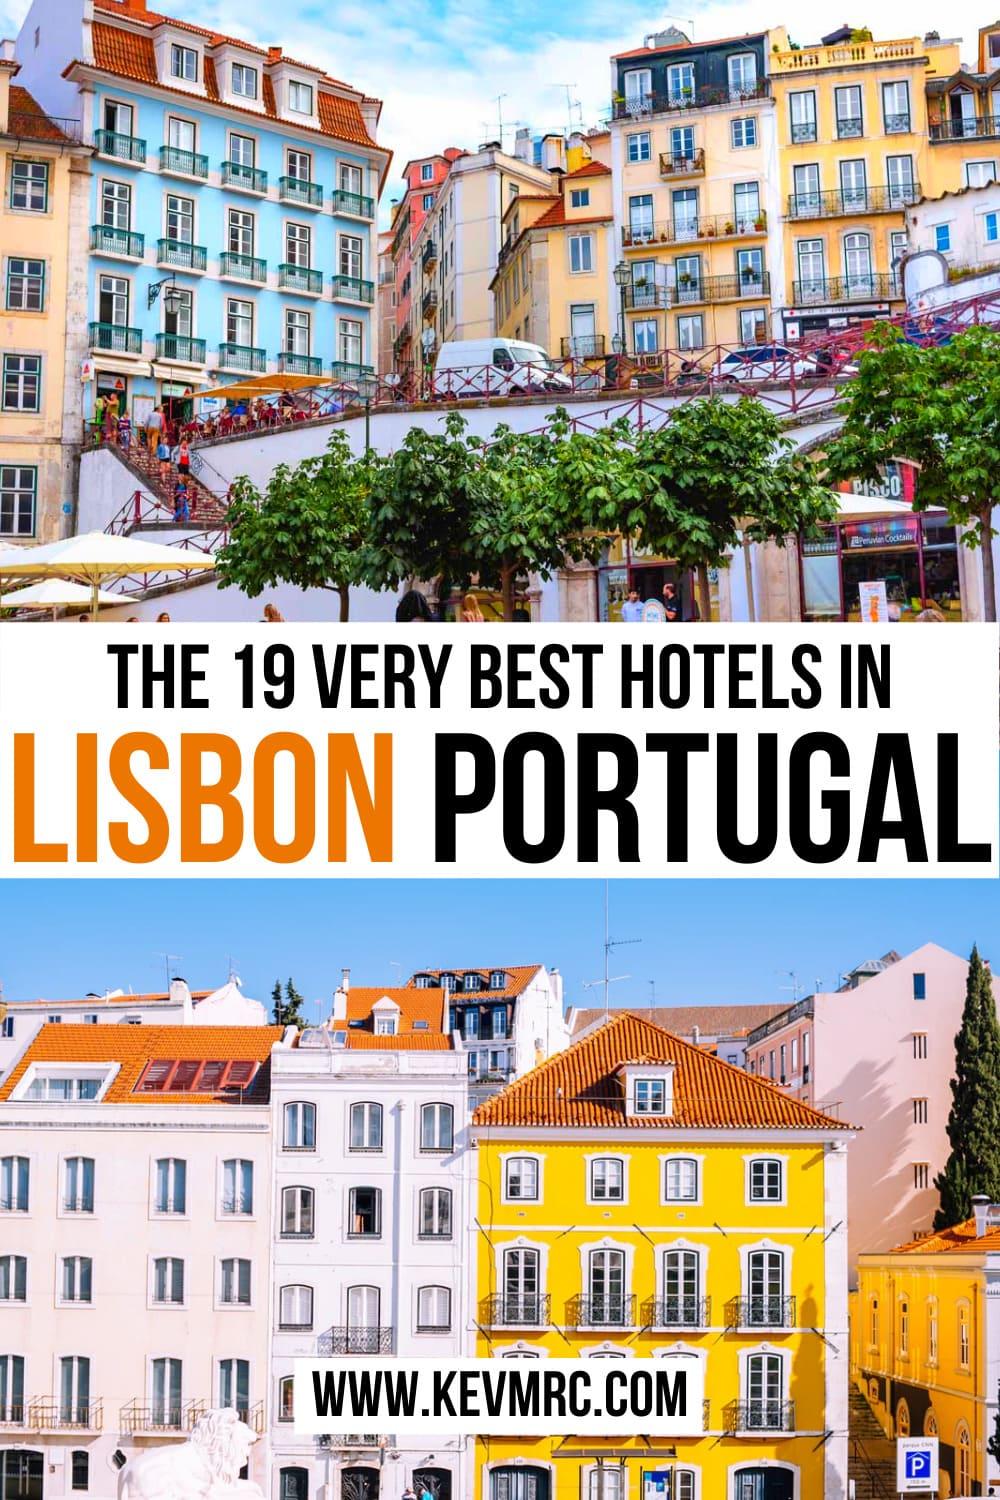 Lisbon Portugal is a very popular destination because this city has it all: incredible historical attractions, nice museums, cool nightlife, delicious food and last but not least, beach! Being as popular as it is, Lisbon offers so much accommodation options that it's difficult to find the perfect place. That's why I've wrote this guide to the Best Hotels in Lisbon Portugal. where to stay in lisbon portugal | lisbon hotels portugal | best hotels lisbon